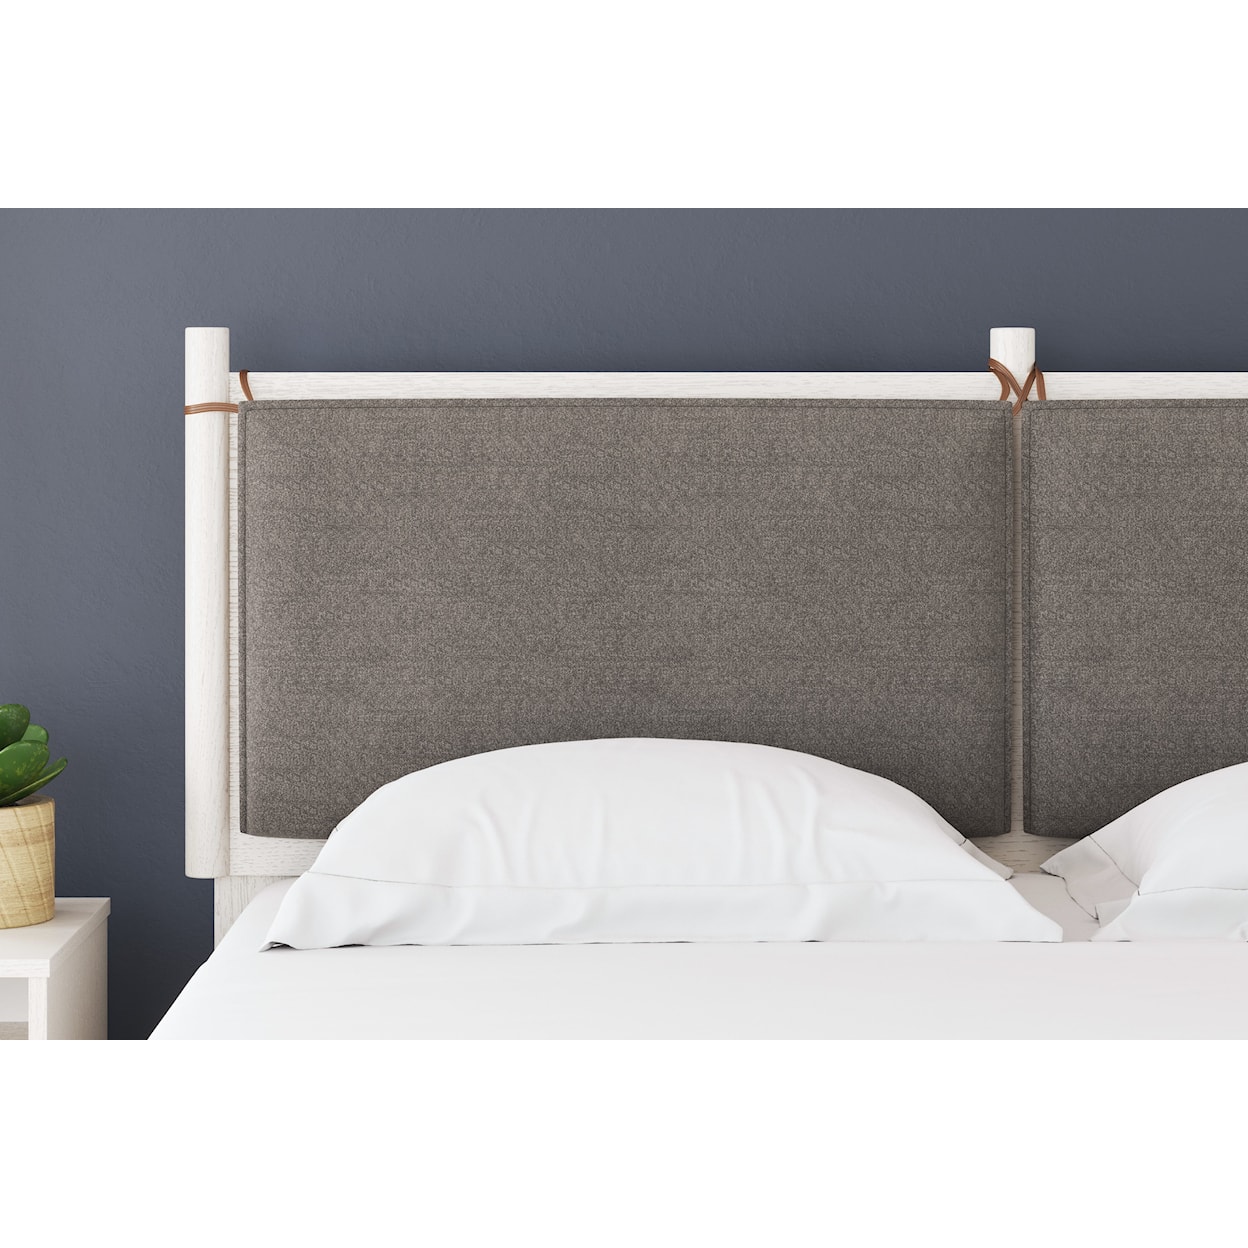 Signature Design by Ashley Aprilyn Queen Panel Bed